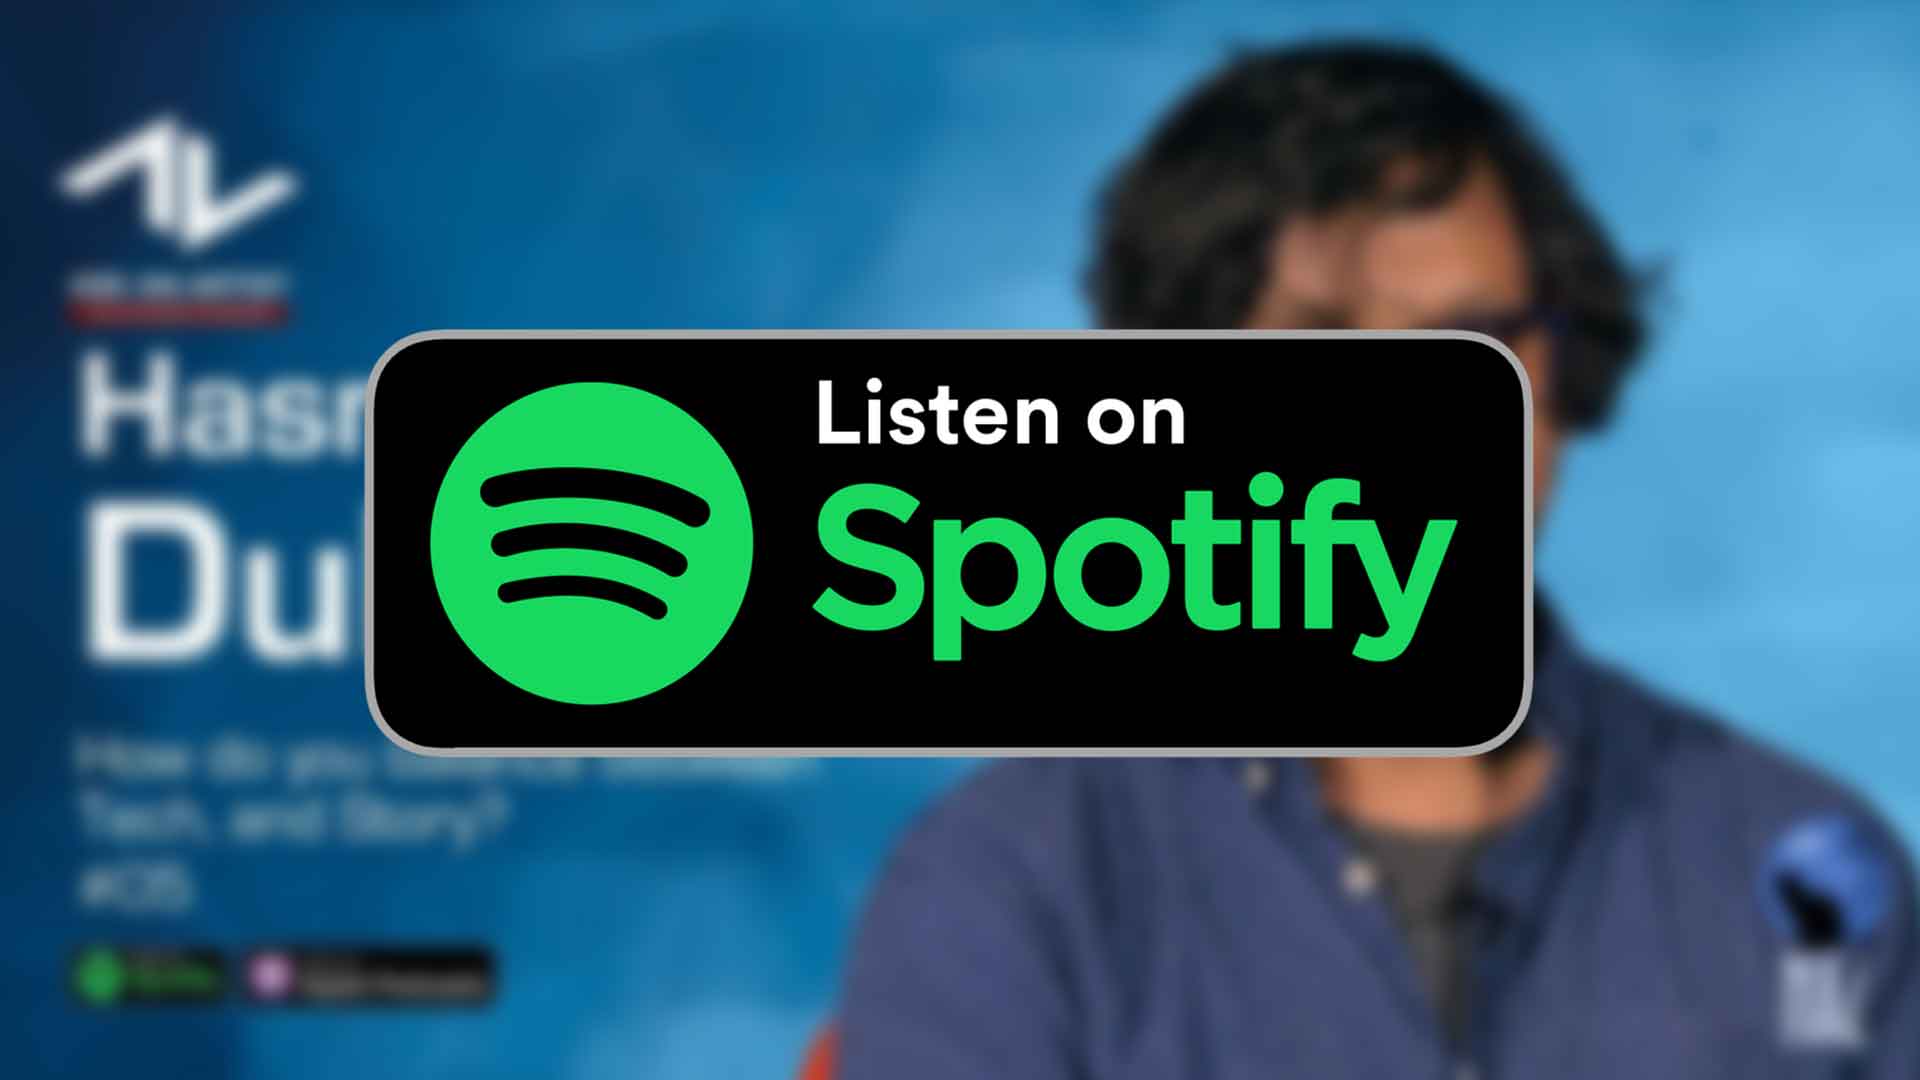 Listen to episode five with HaZ on Spotify.